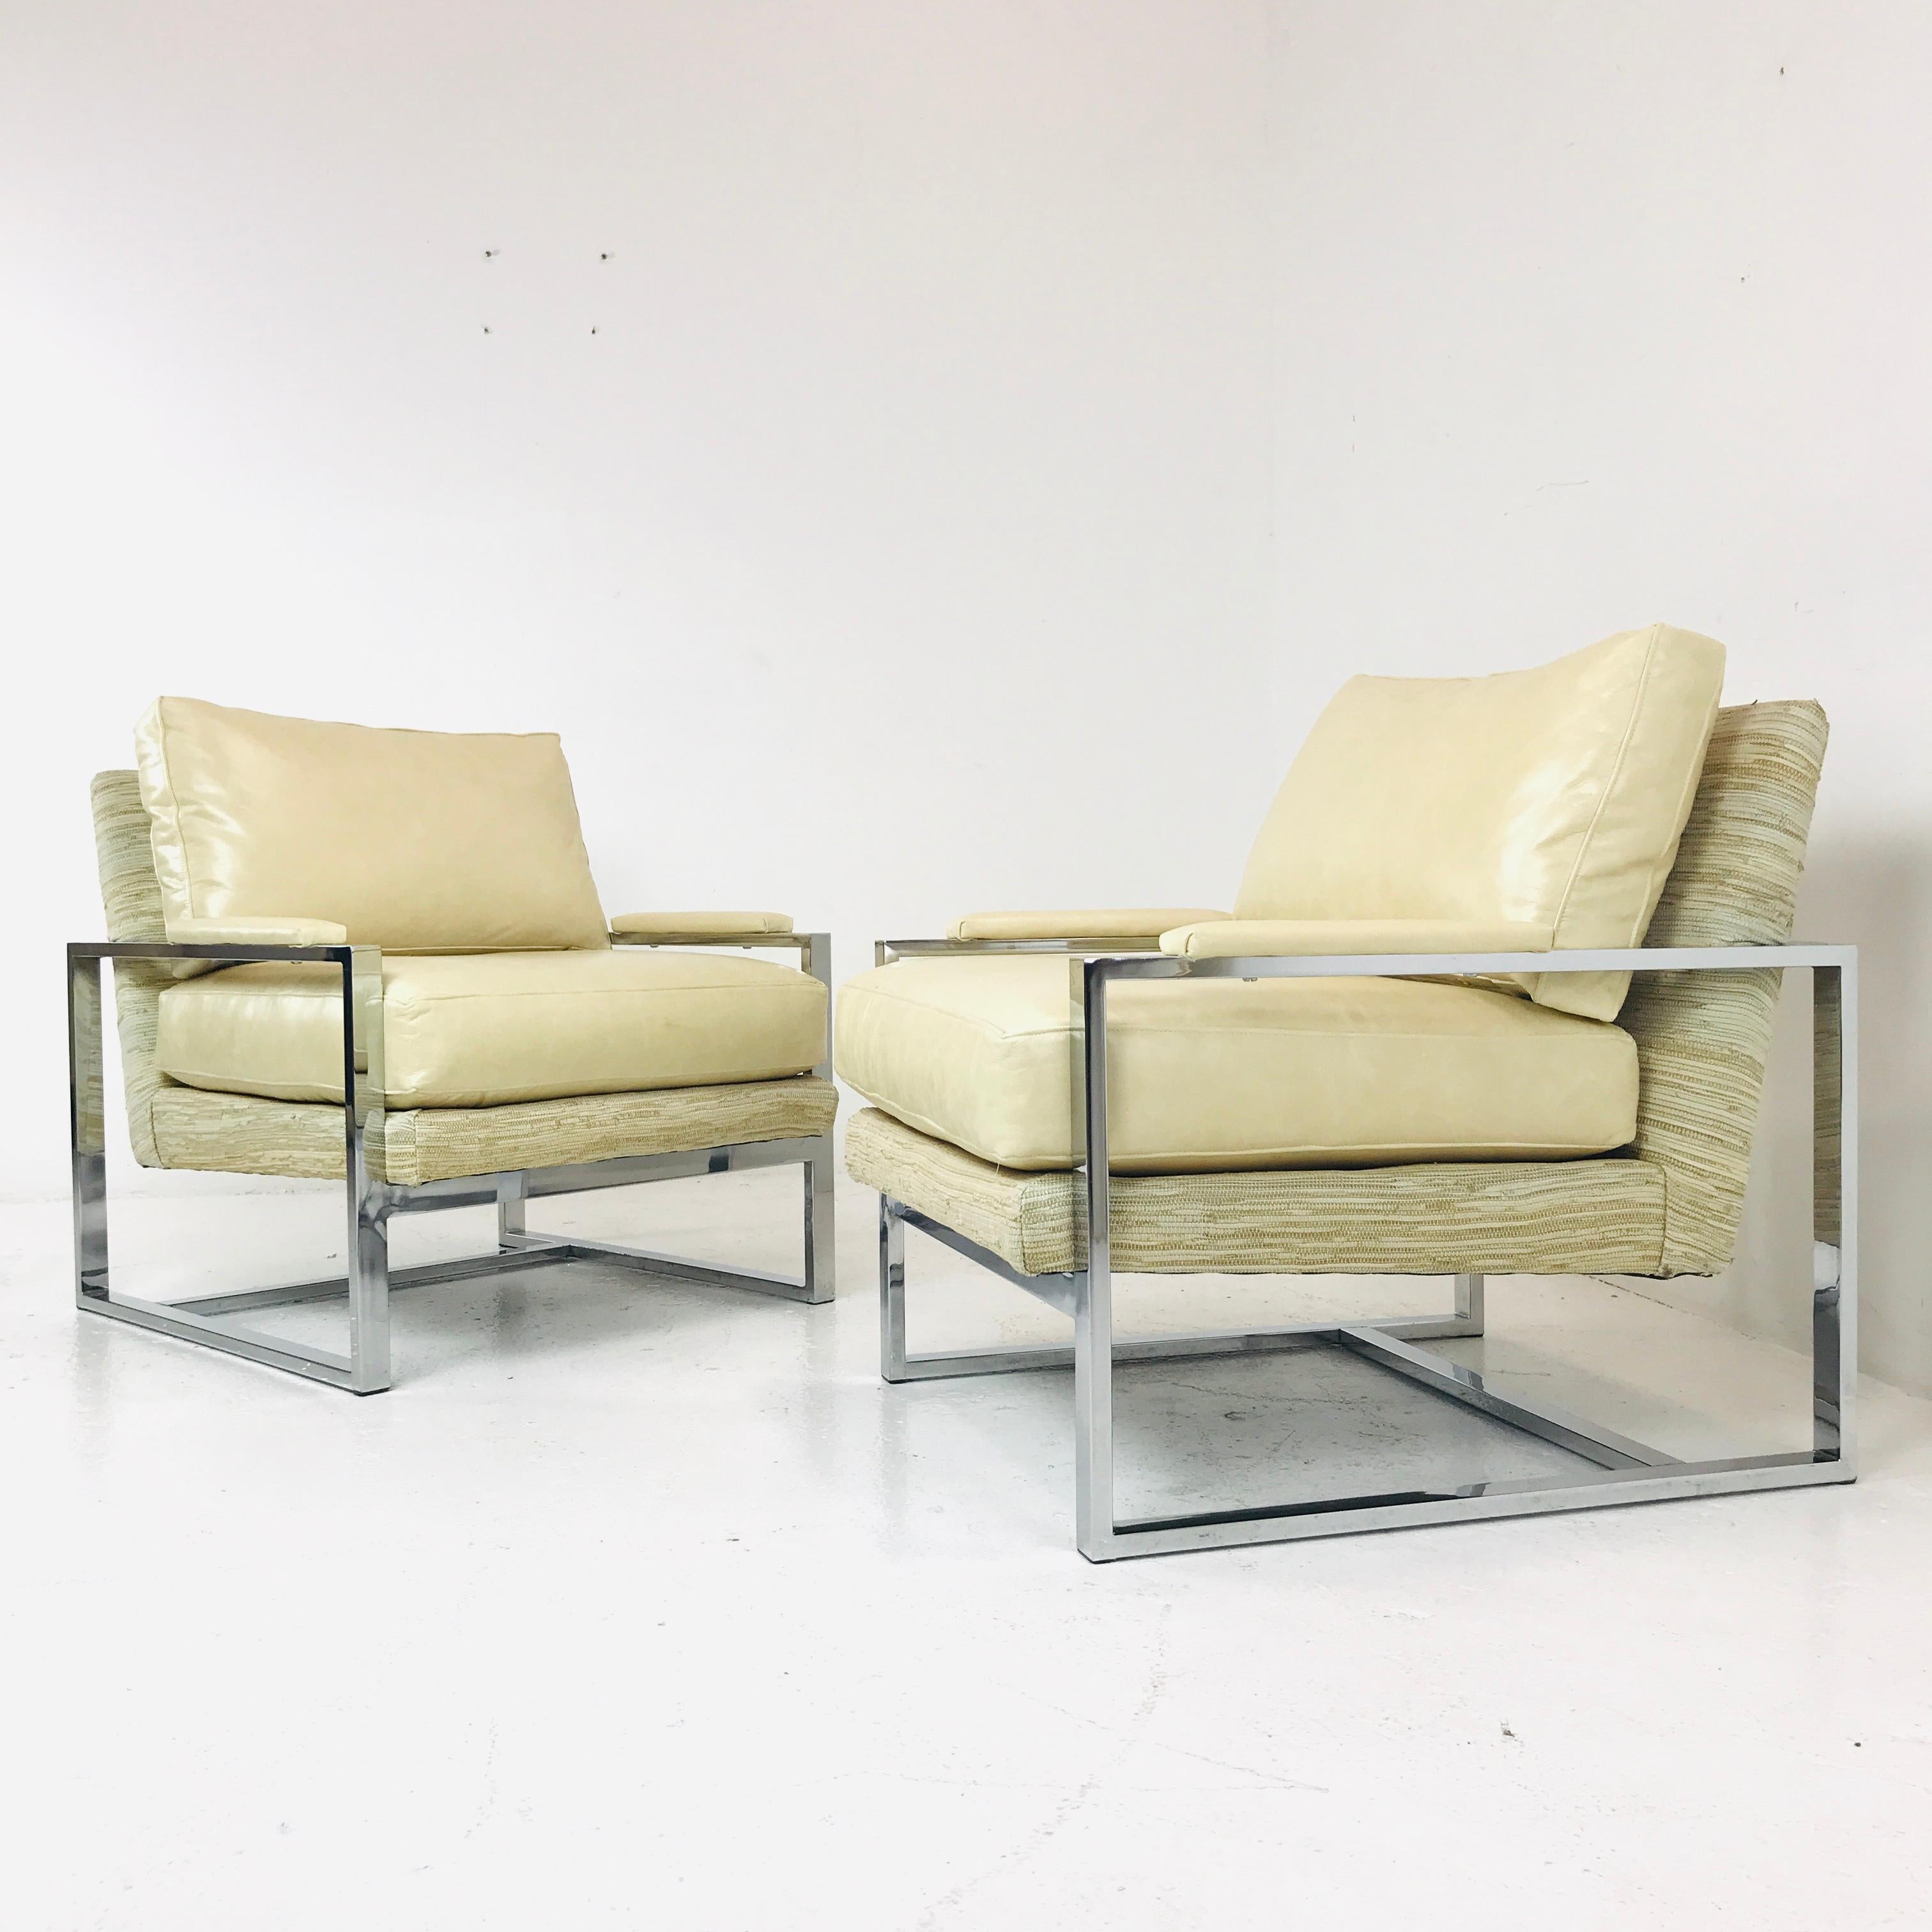 Late 20th Century Pair of Chrome Milo Baughman Style Chairs